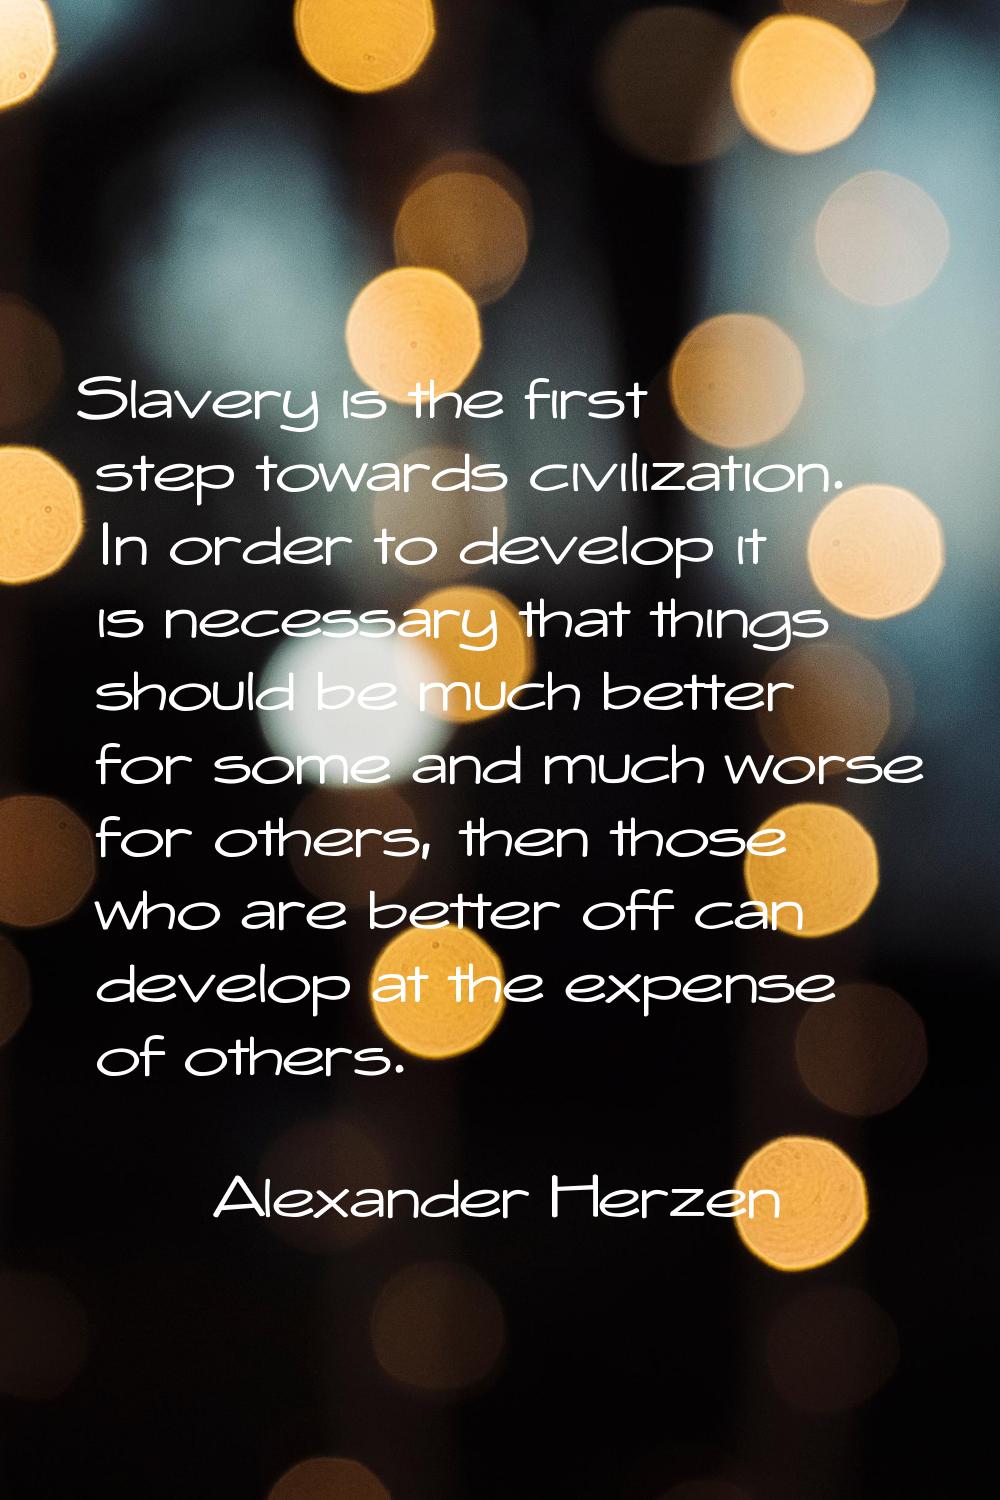 Slavery is the first step towards civilization. In order to develop it is necessary that things sho